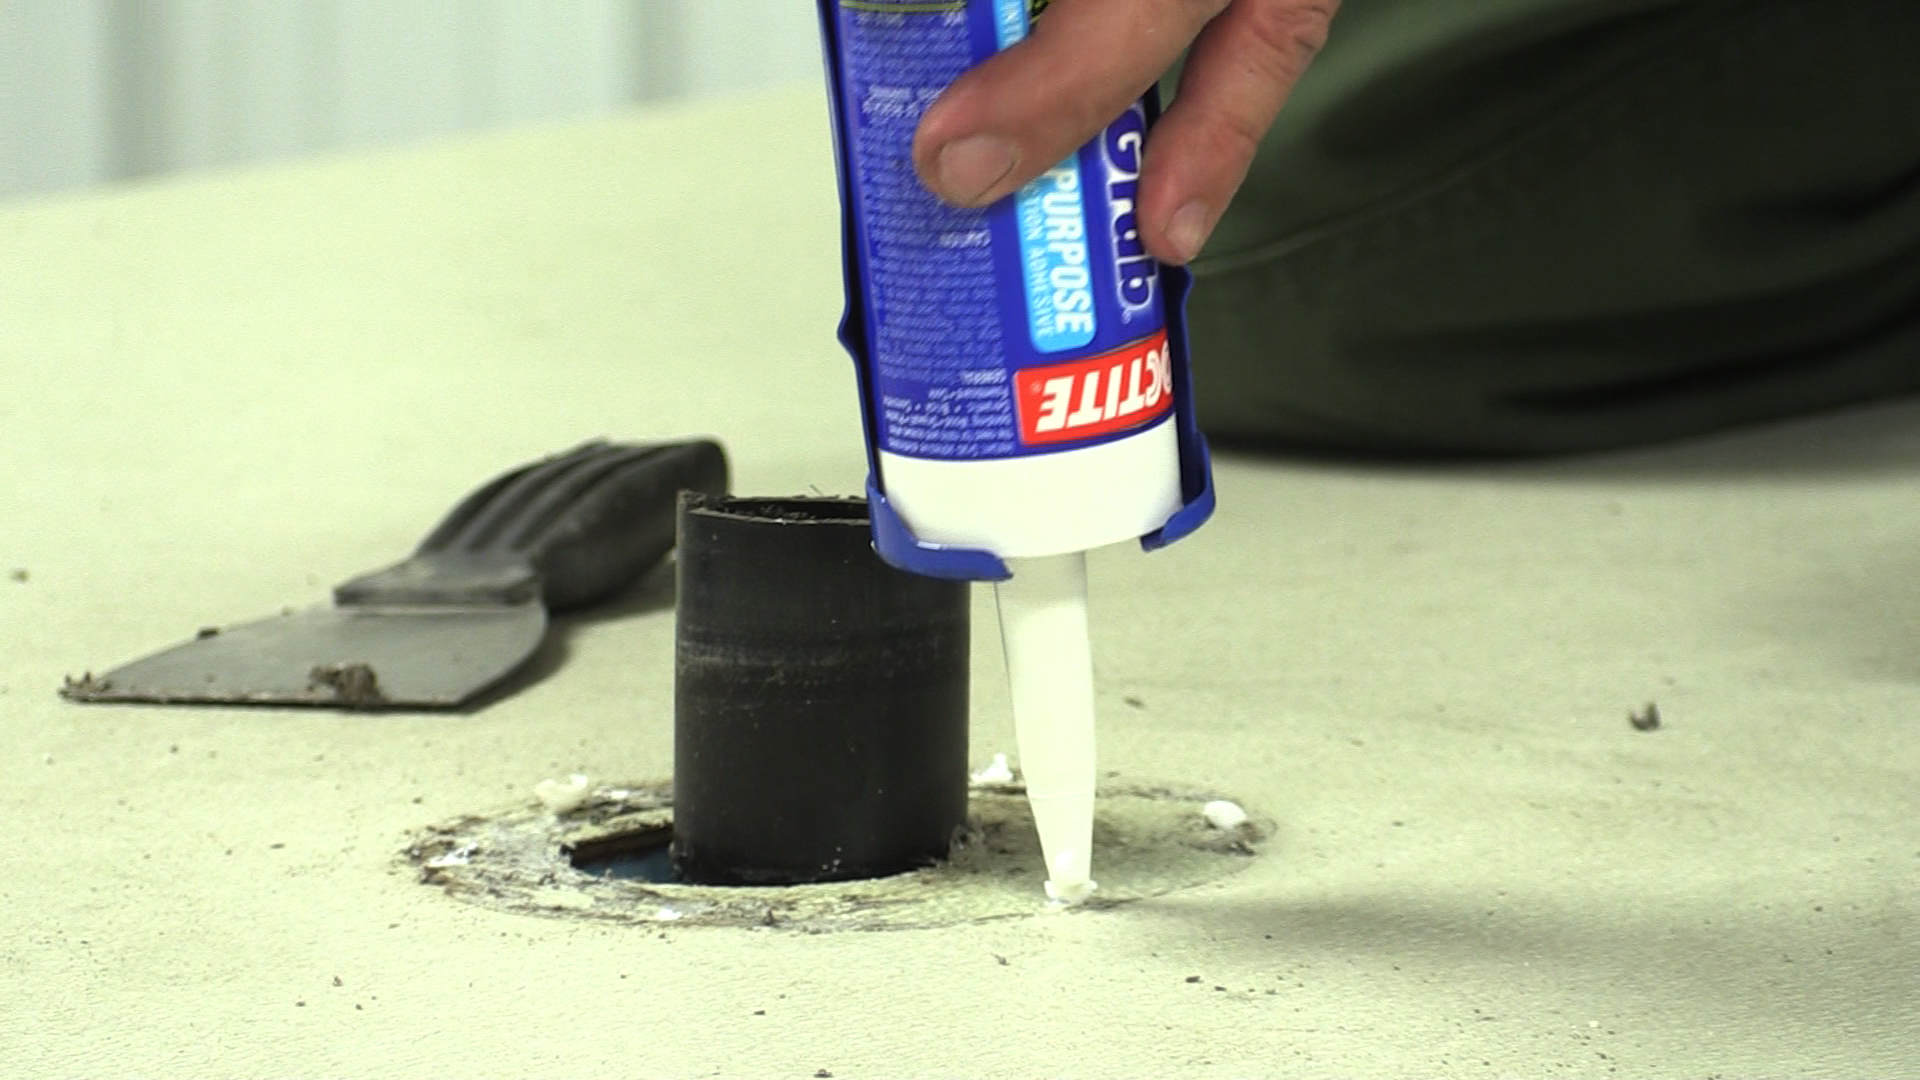 Putting glue around a hole for a pipe